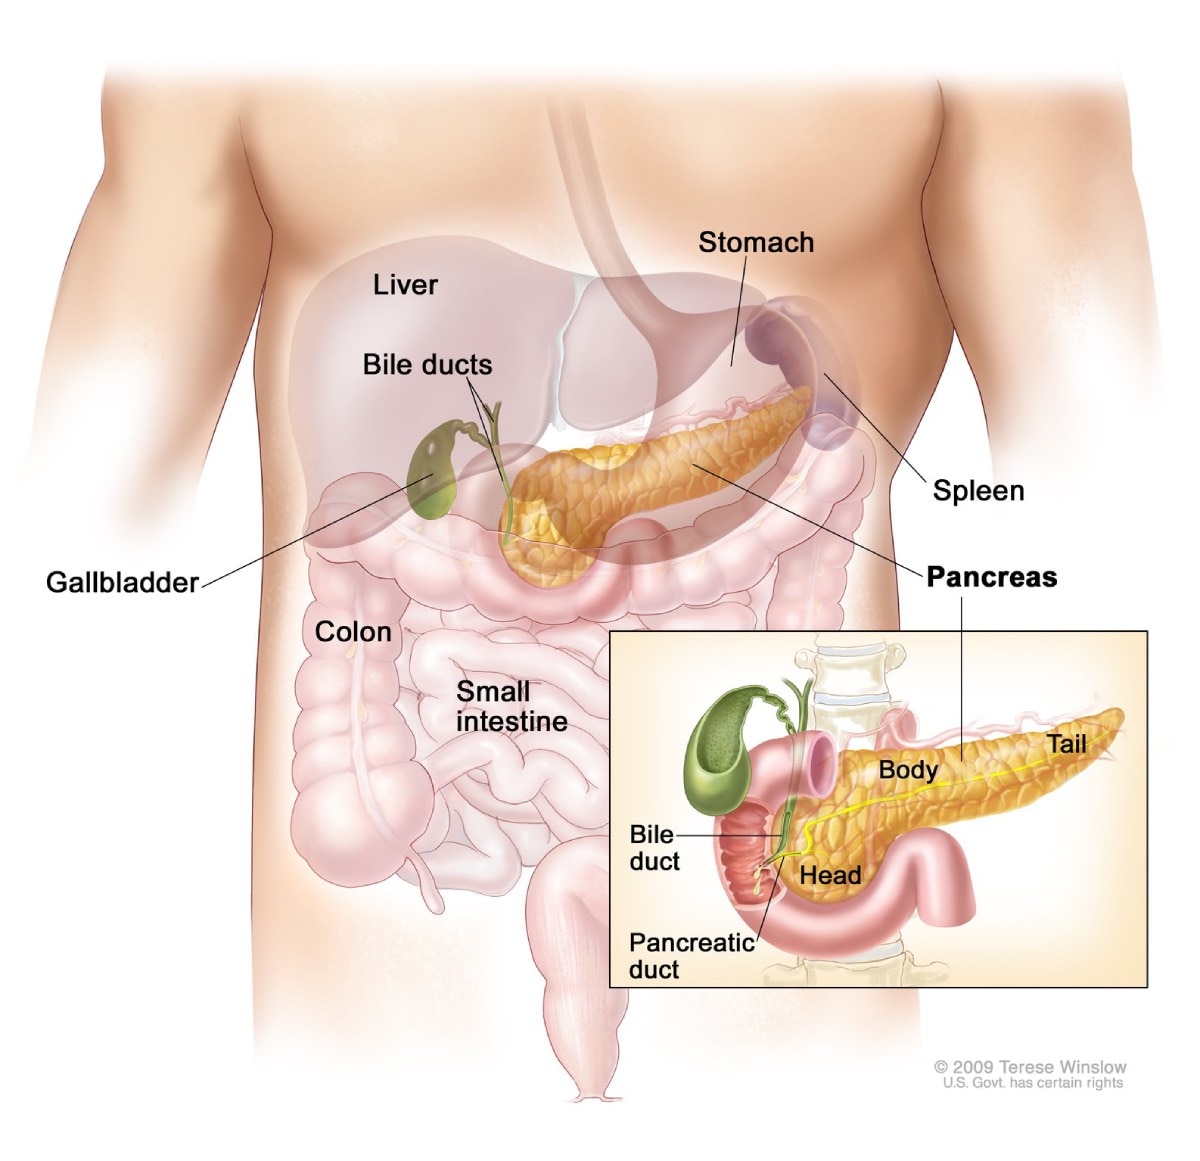 Anatomy of the pancreas. Drawing shows the pancreas, stomach, spleen, liver, gallbladder, bile ducts, colon, and small intestine. An inset shows the head, body, and tail of the pancreas. The bile duct and pancreatic duct are also shown.